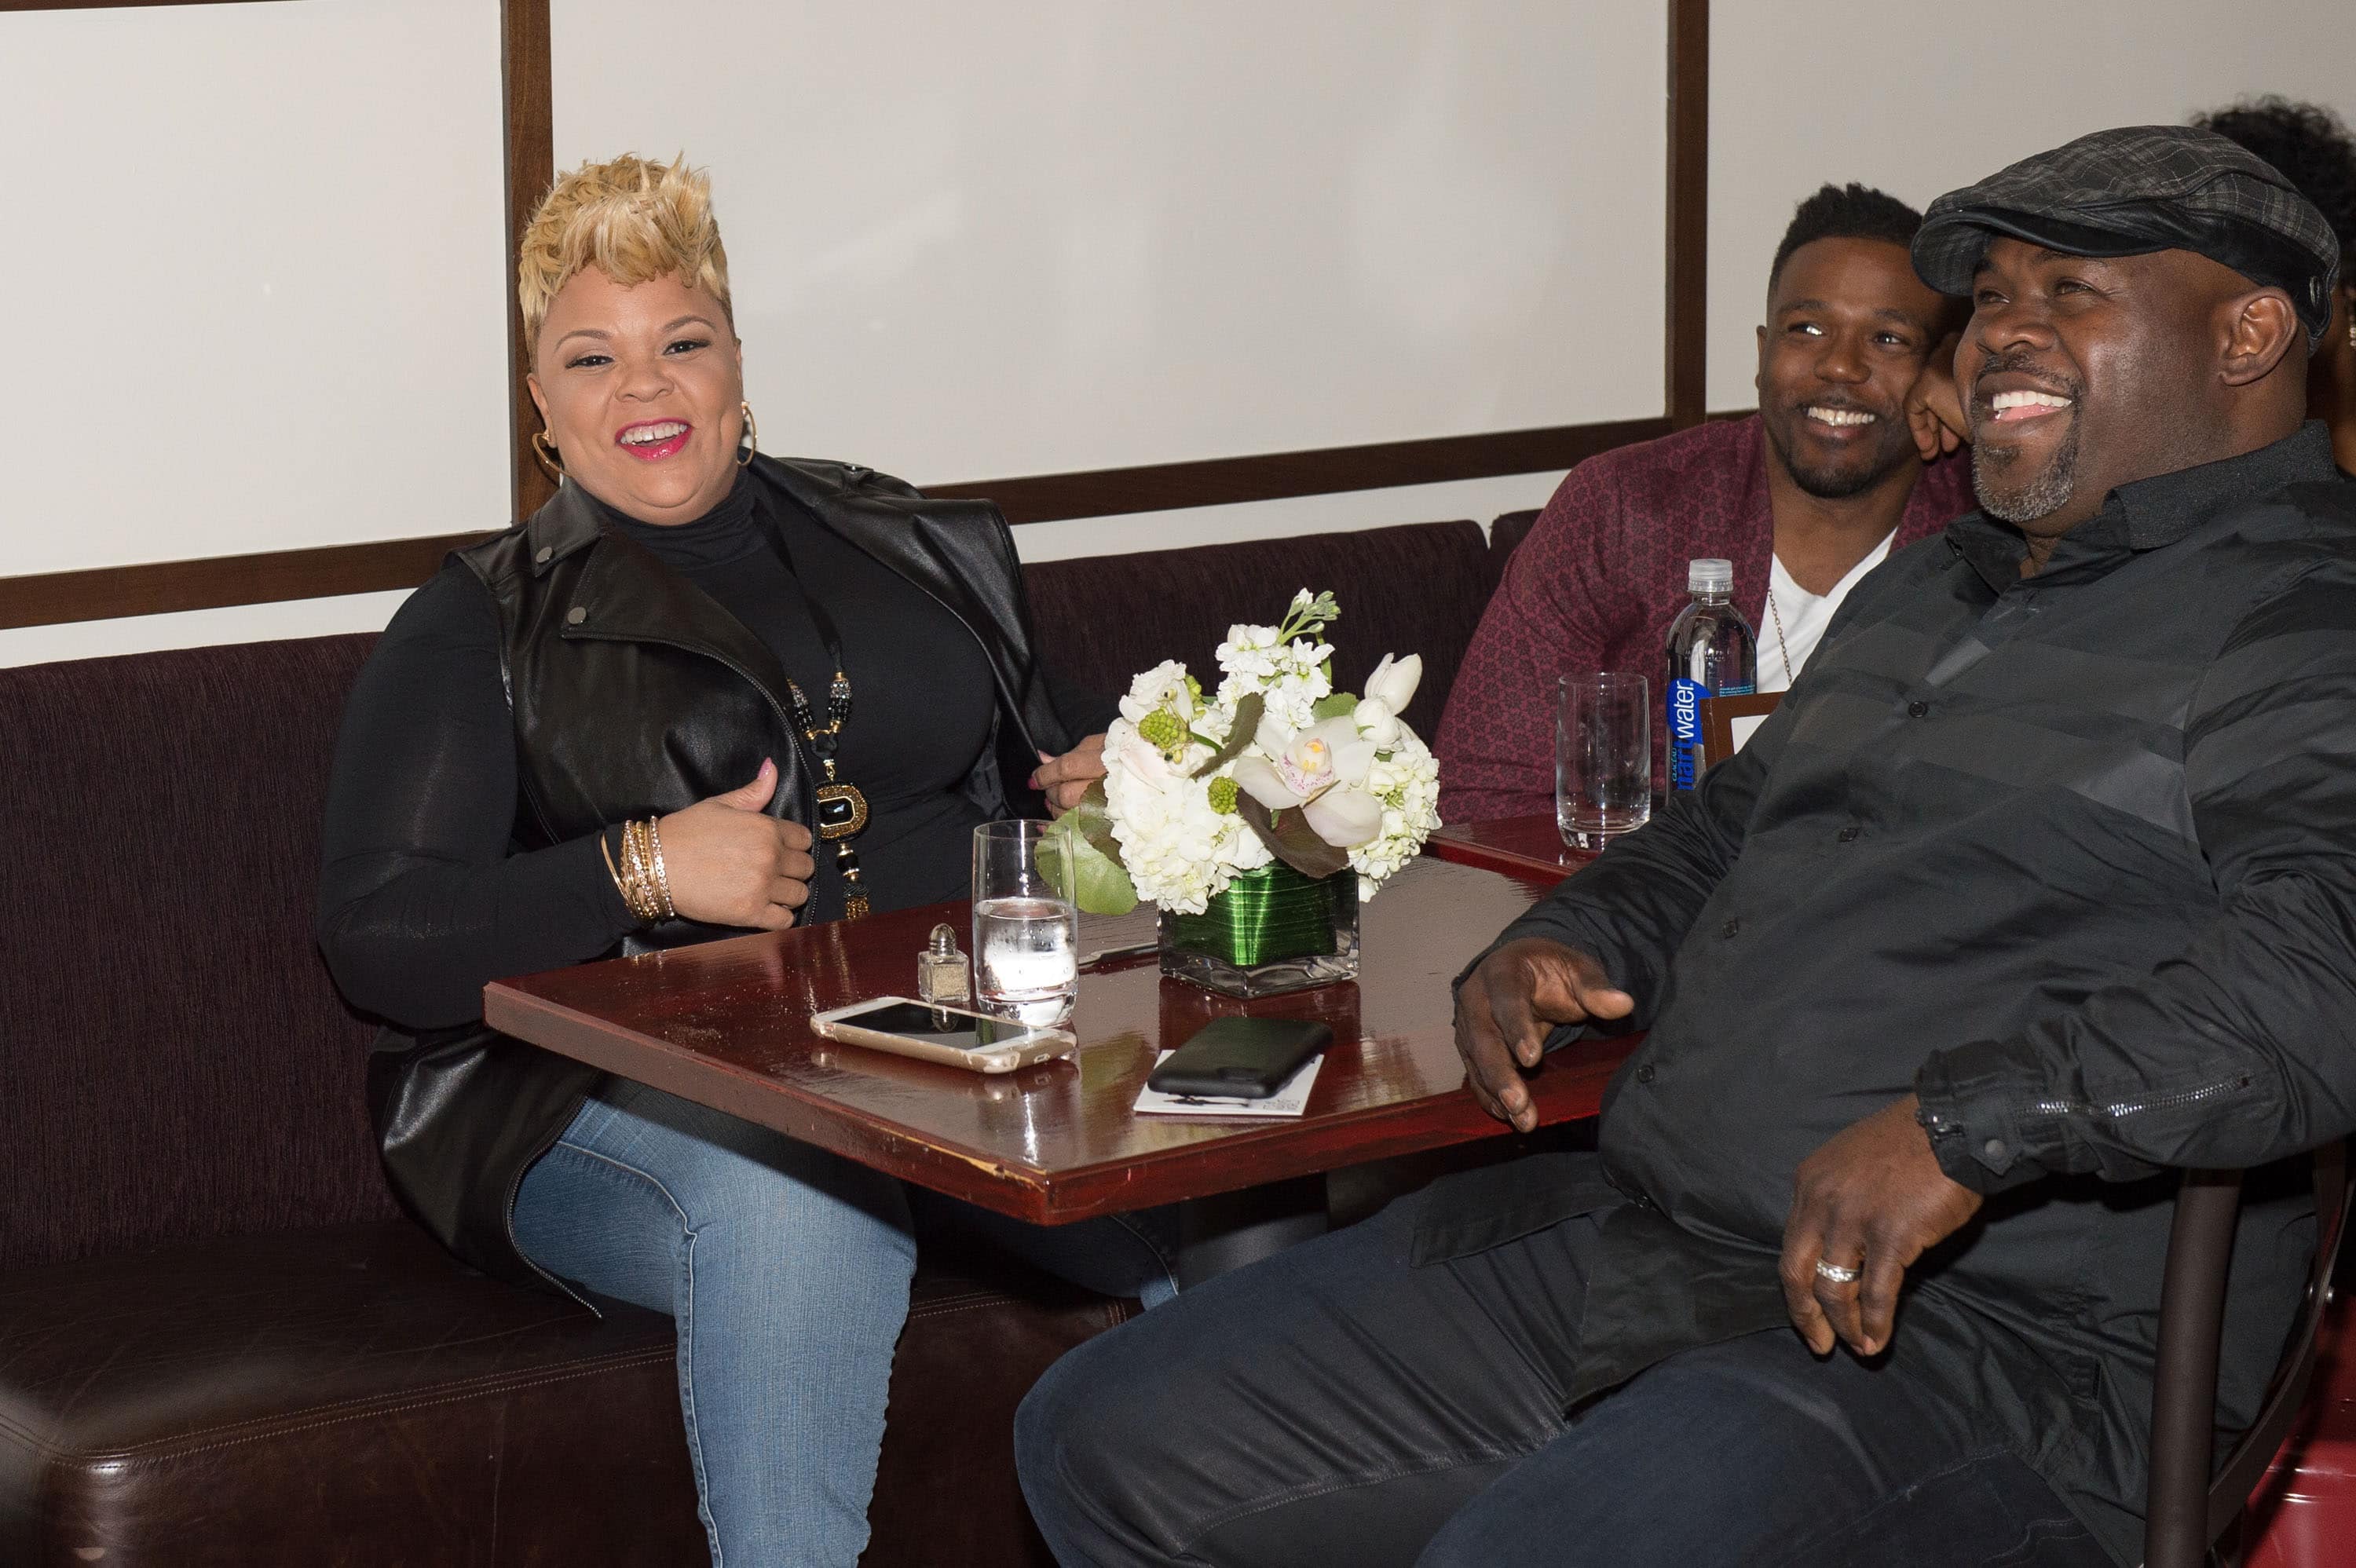 ATLANTA, GEORGIA - FEBRUARY 16: Singer and actress Tamela Mann and actor David Mann attend 'It's a Mann's World' season two luncheon screening at TRACE at the W on February 16, 2016 in Atlanta, Georgia. (Photo by Marcus Ingram/BET/Getty Images for BET)